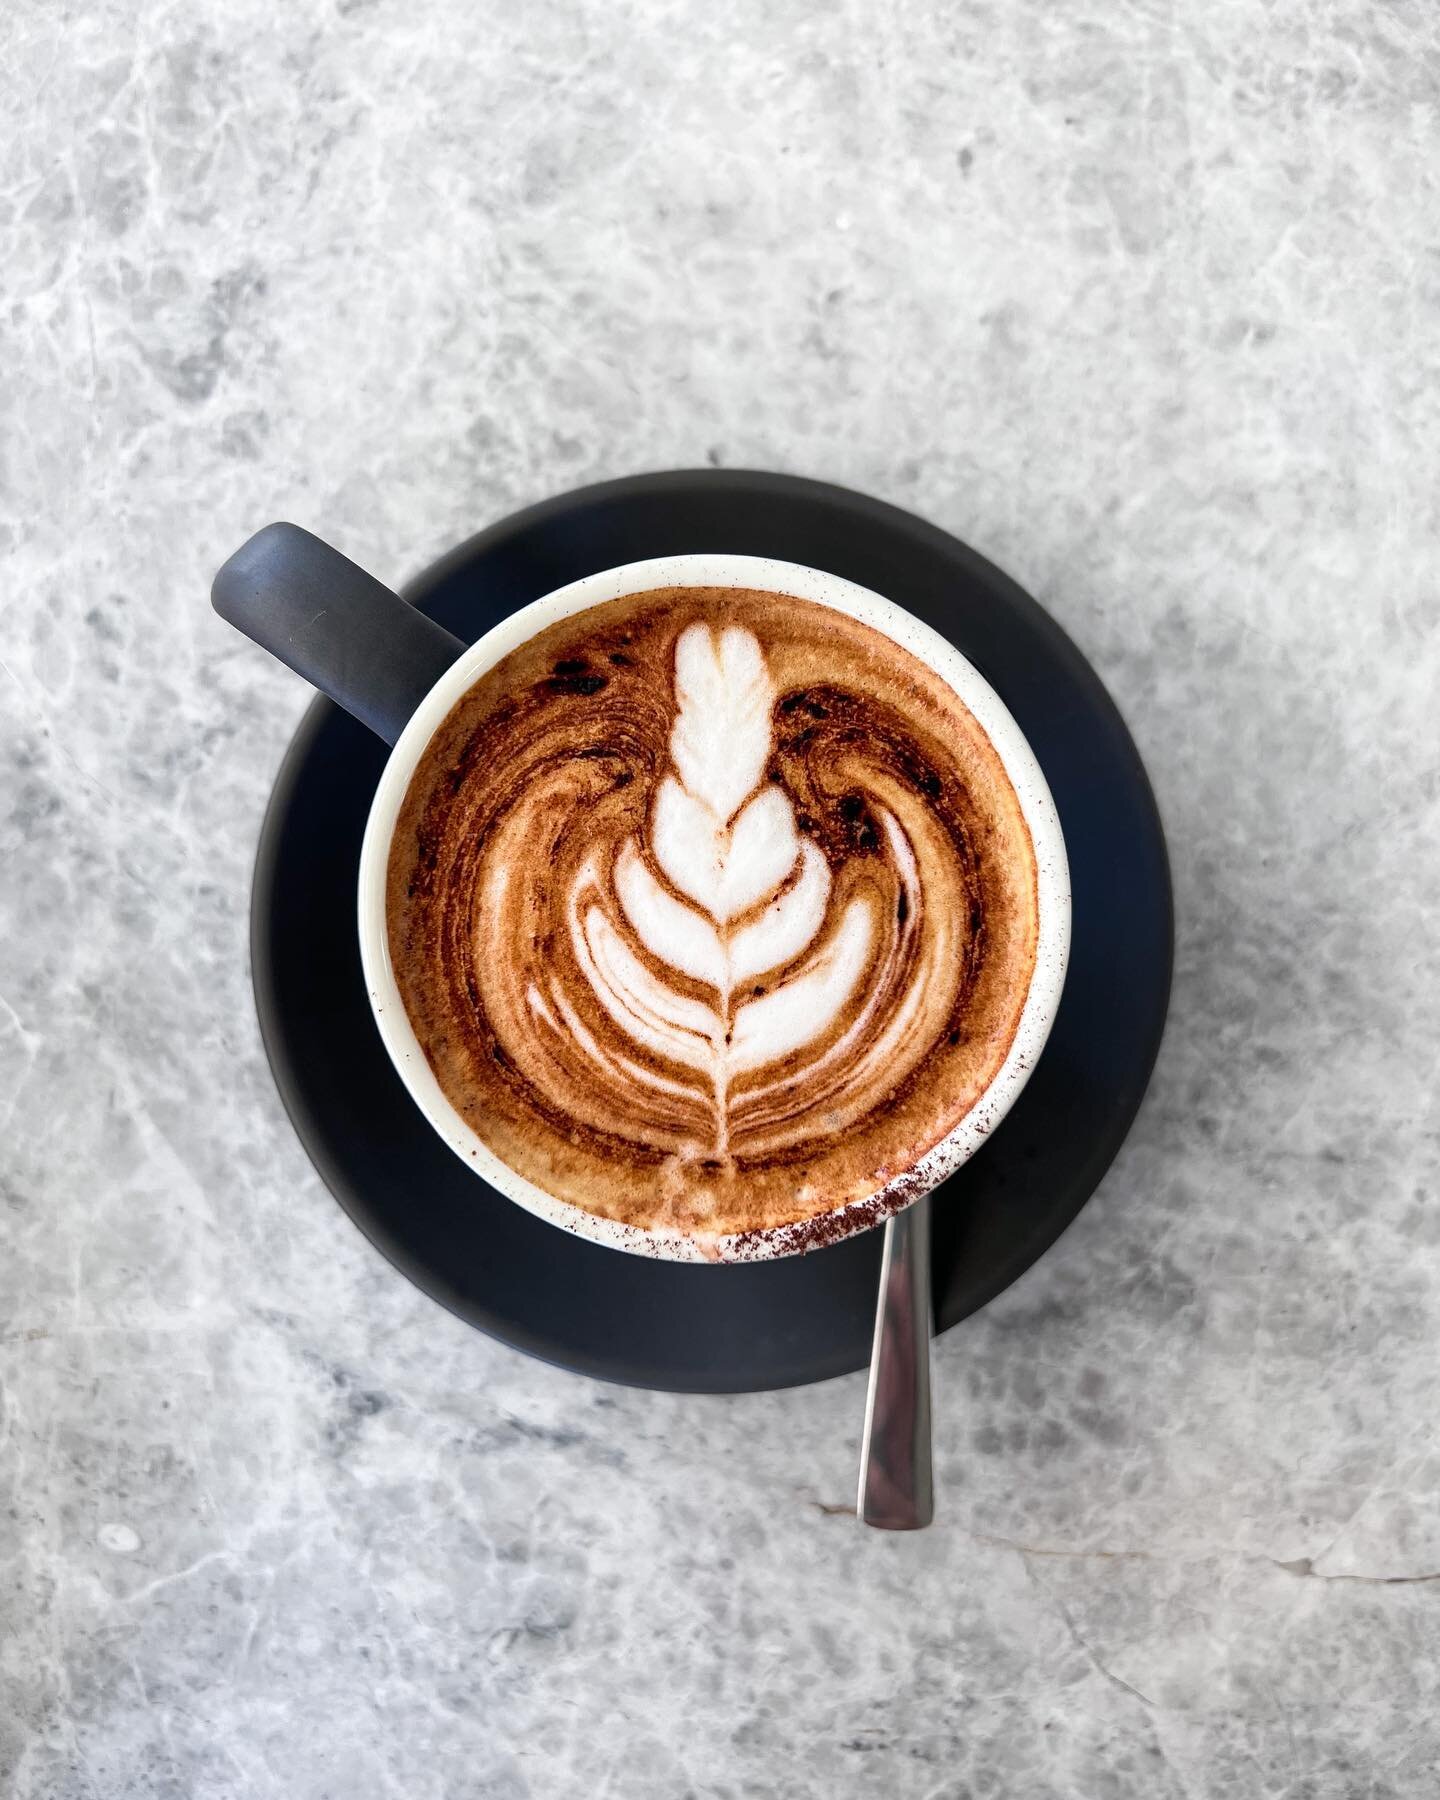 But first coffee ☕️ 💤 
.
.
.
.
.
.
.
.
.
.
.
#coffee #coffeelover #jaggersmelbourne #coffeetime #stkilda #stkildajaggers #lovecoffee #whatsonmelbourne #whatsonstkilda #stkildabreakfast #breakfast #breakfastinmelbourne